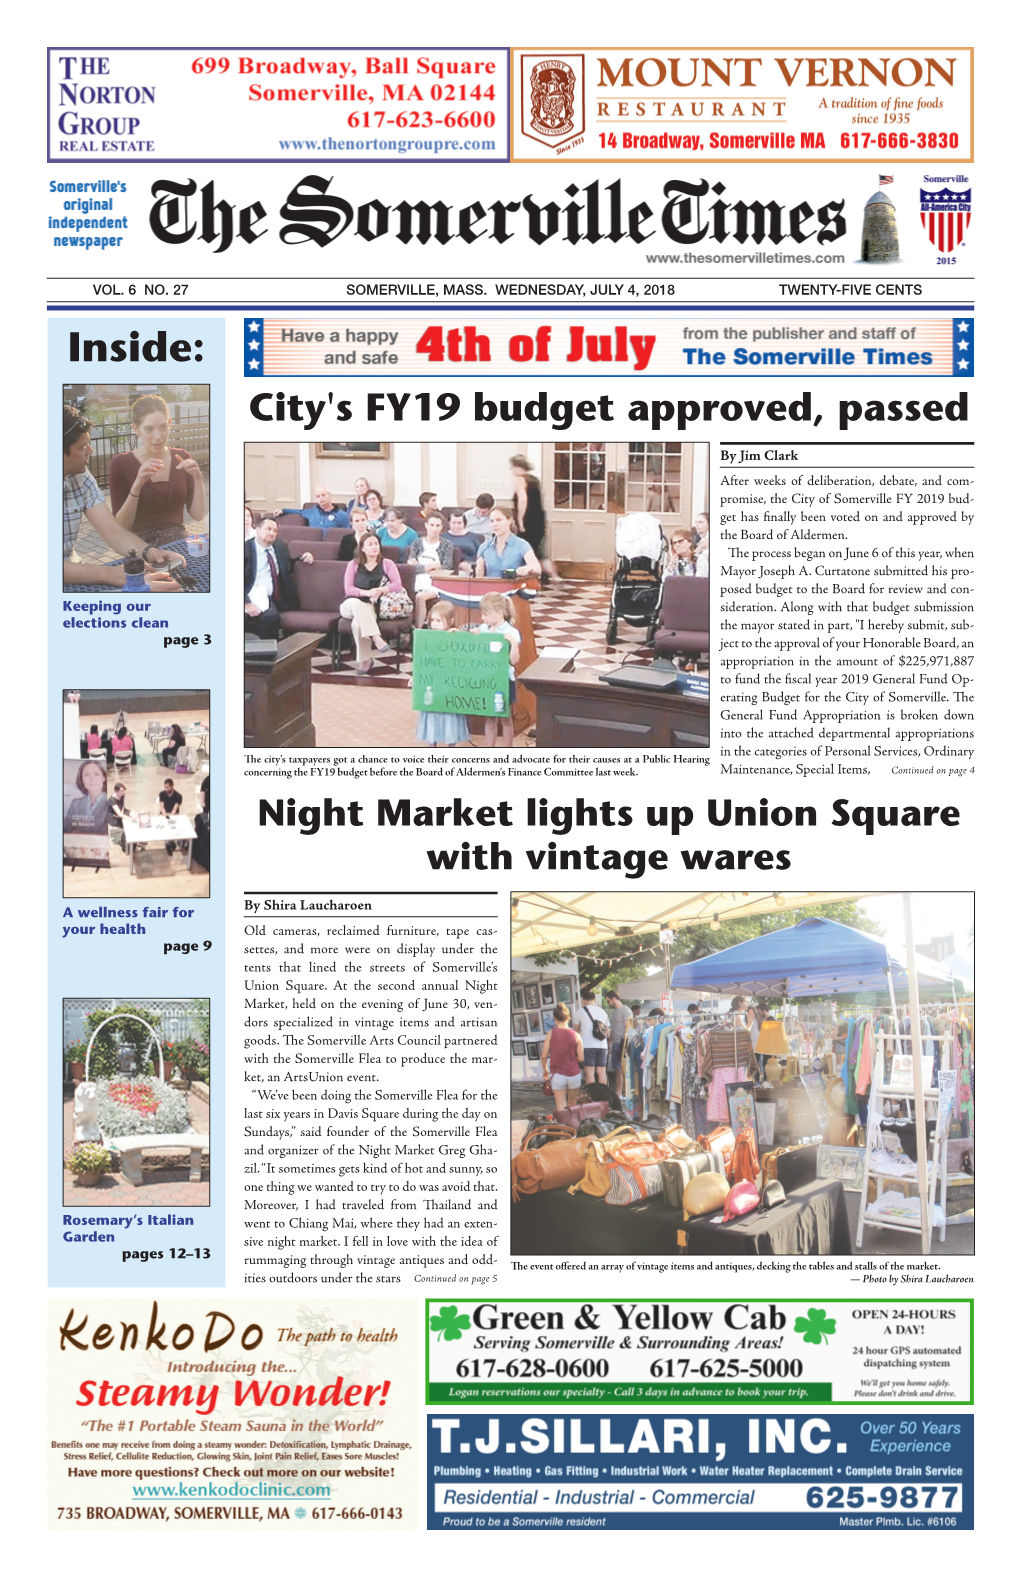 JULY 4, 2018 TWENTY-FIVE CENTS Inside: City's FY19 Budget Approved, Passed